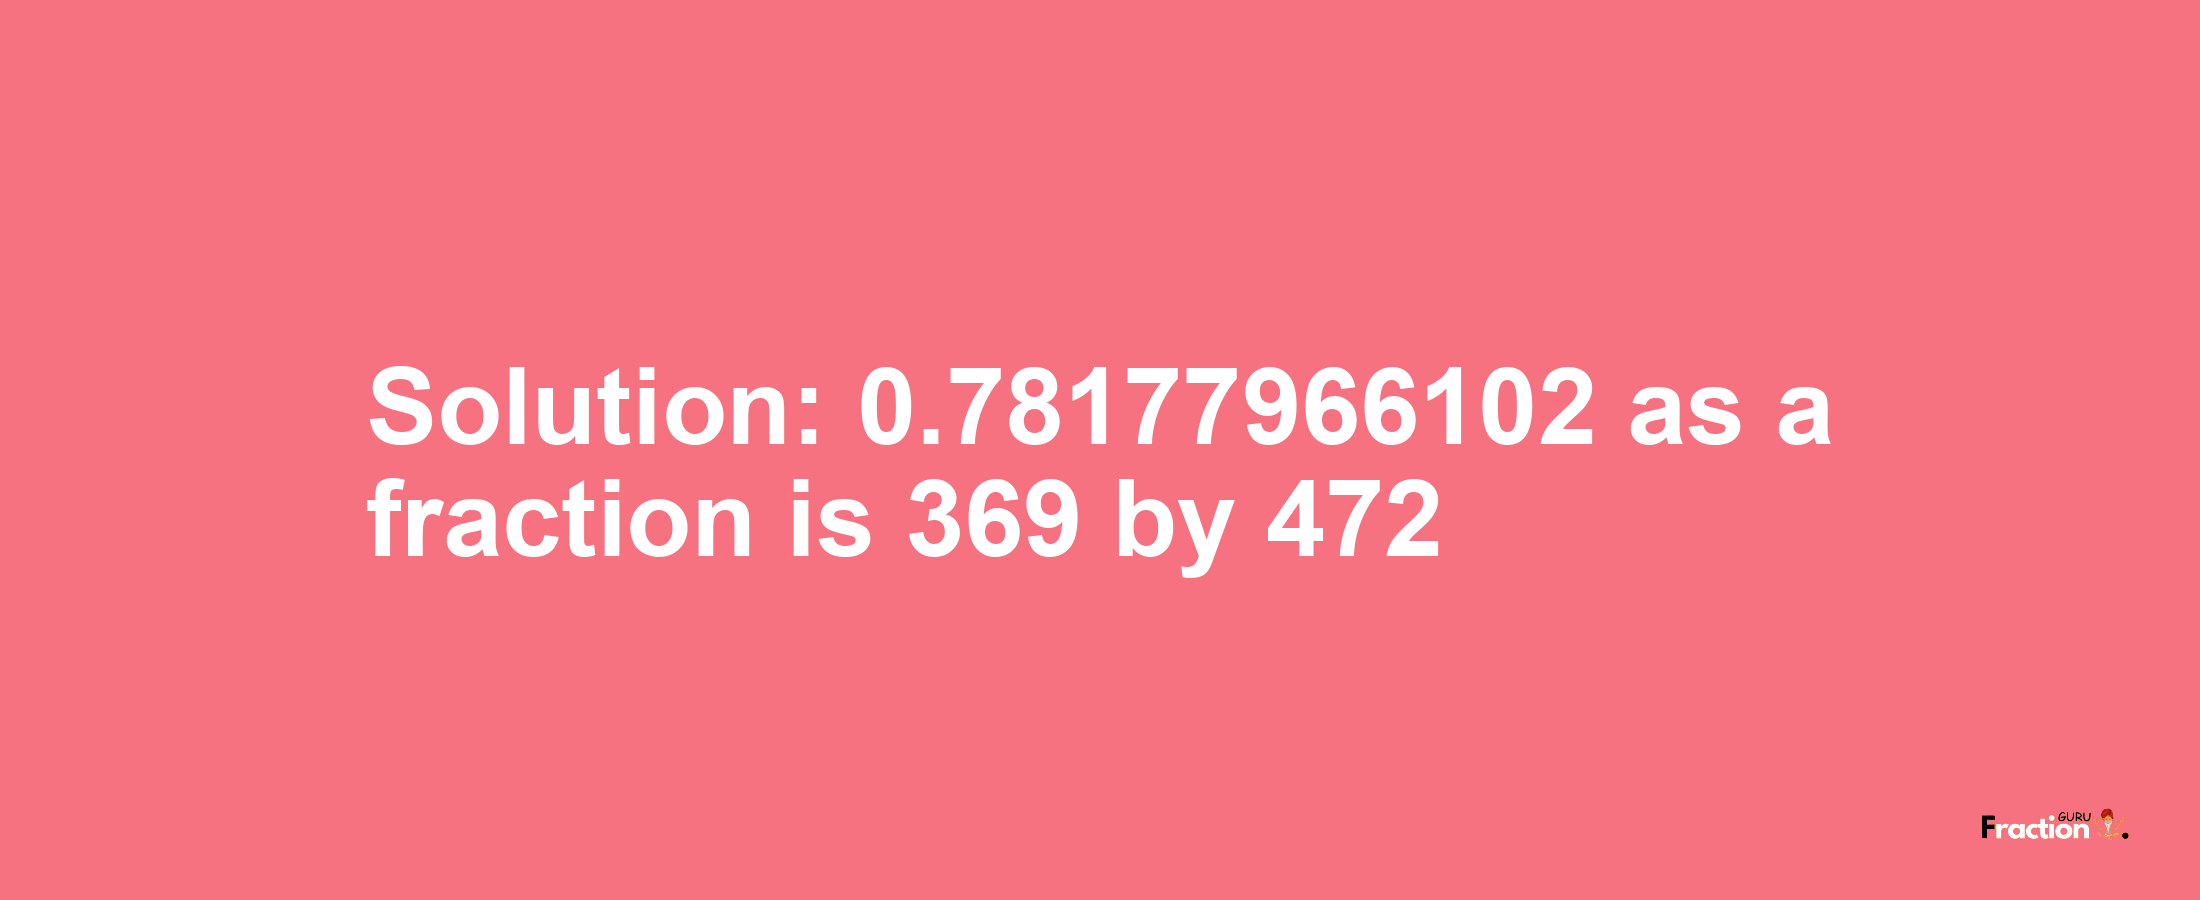 Solution:0.78177966102 as a fraction is 369/472